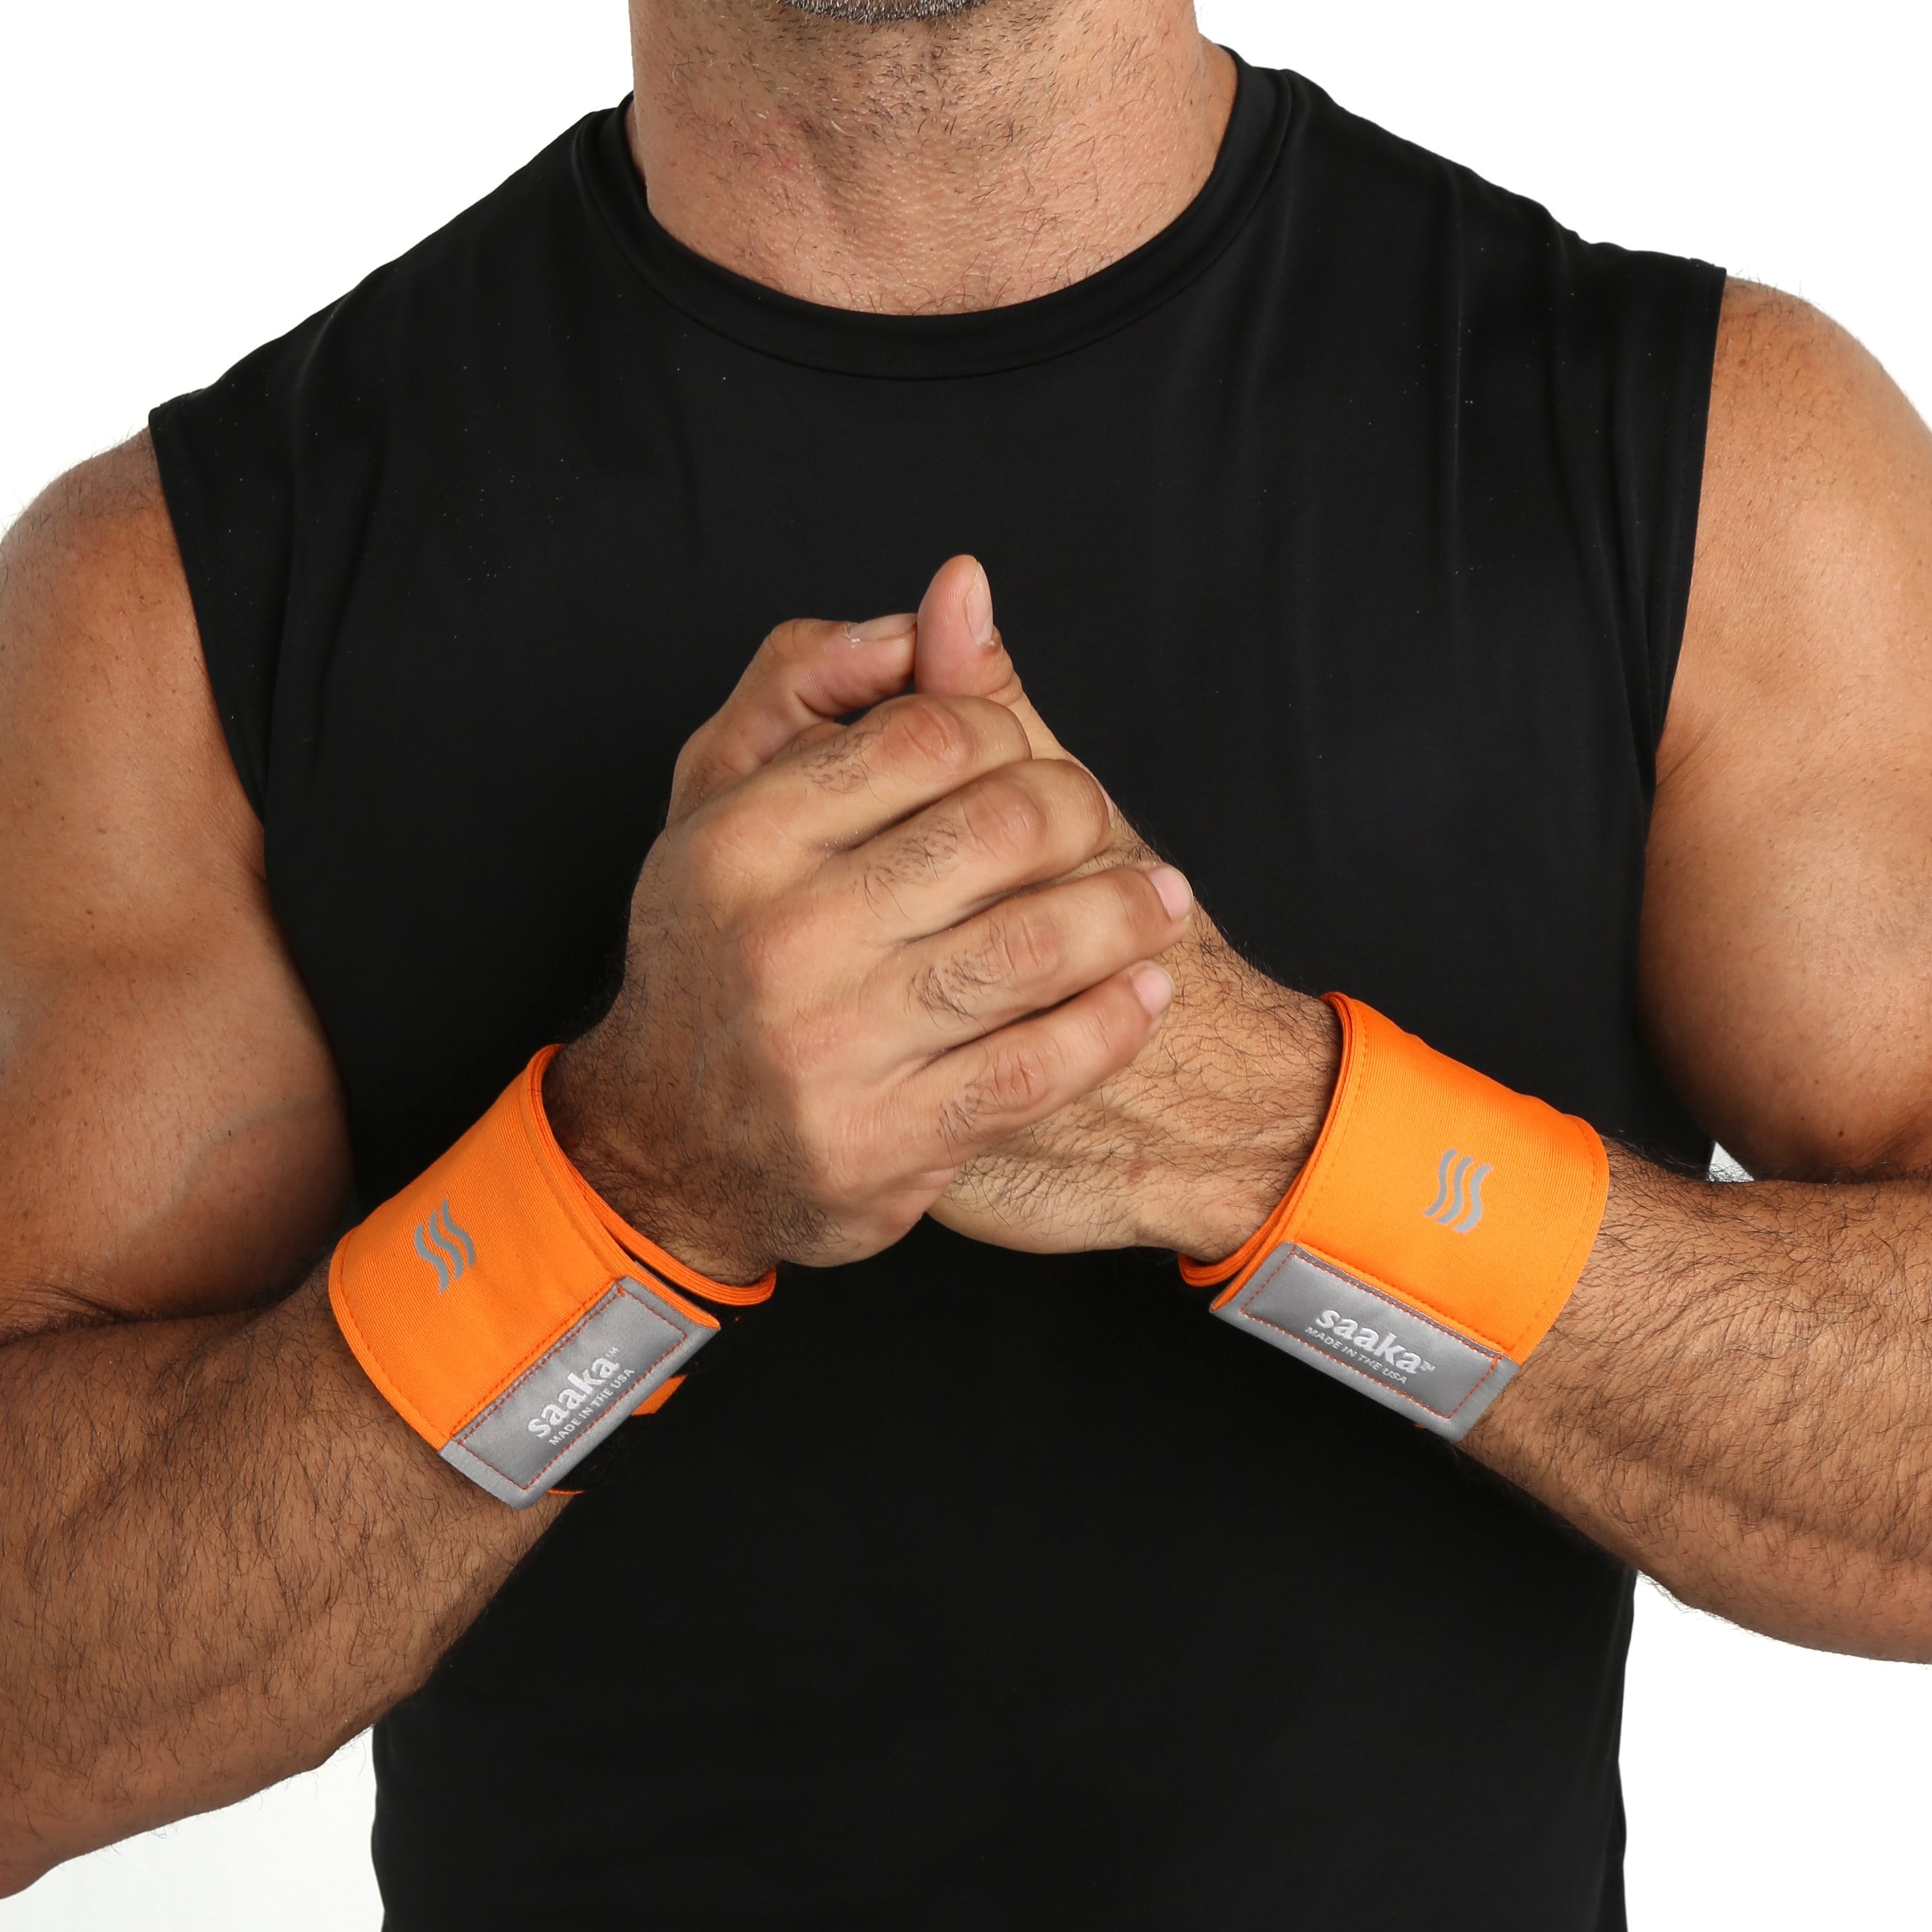 Man wearing wristbands in orange color.